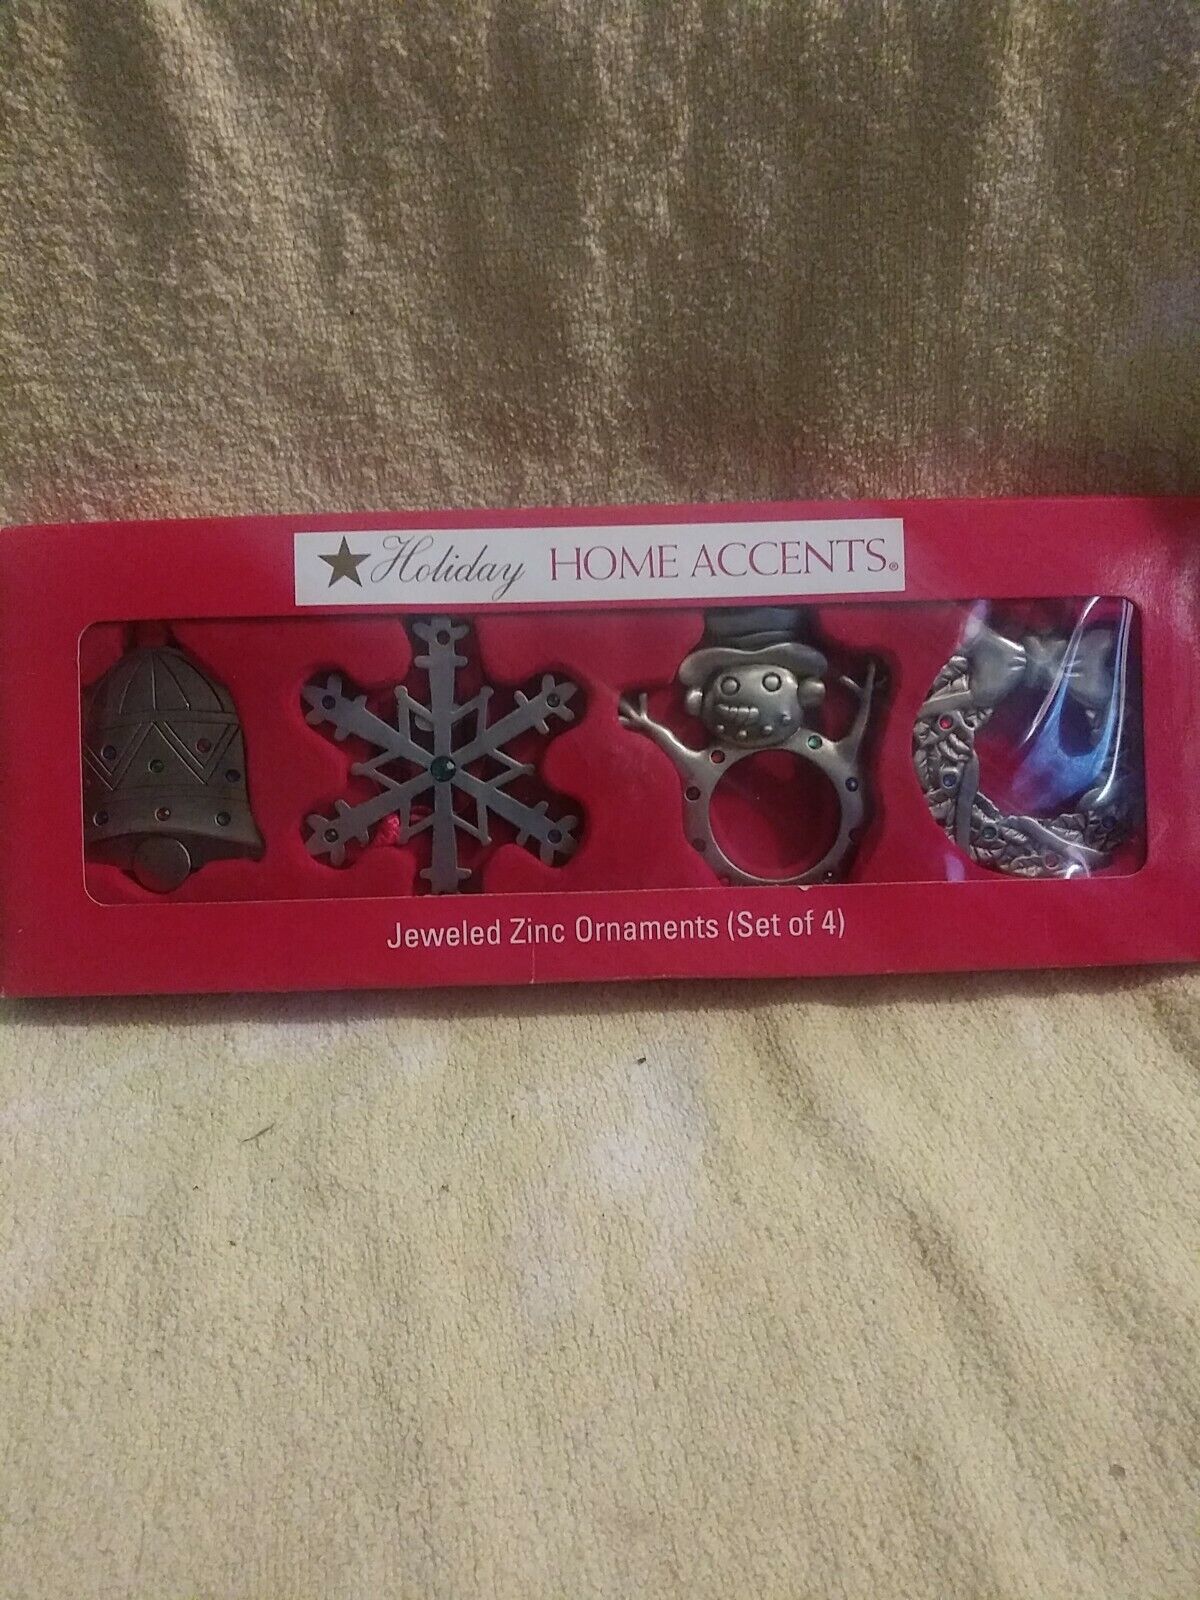 Jeweled Zinc Christmas Ornaments ~ Set of 4 ~ Belk Holiday Home Accents ~ New